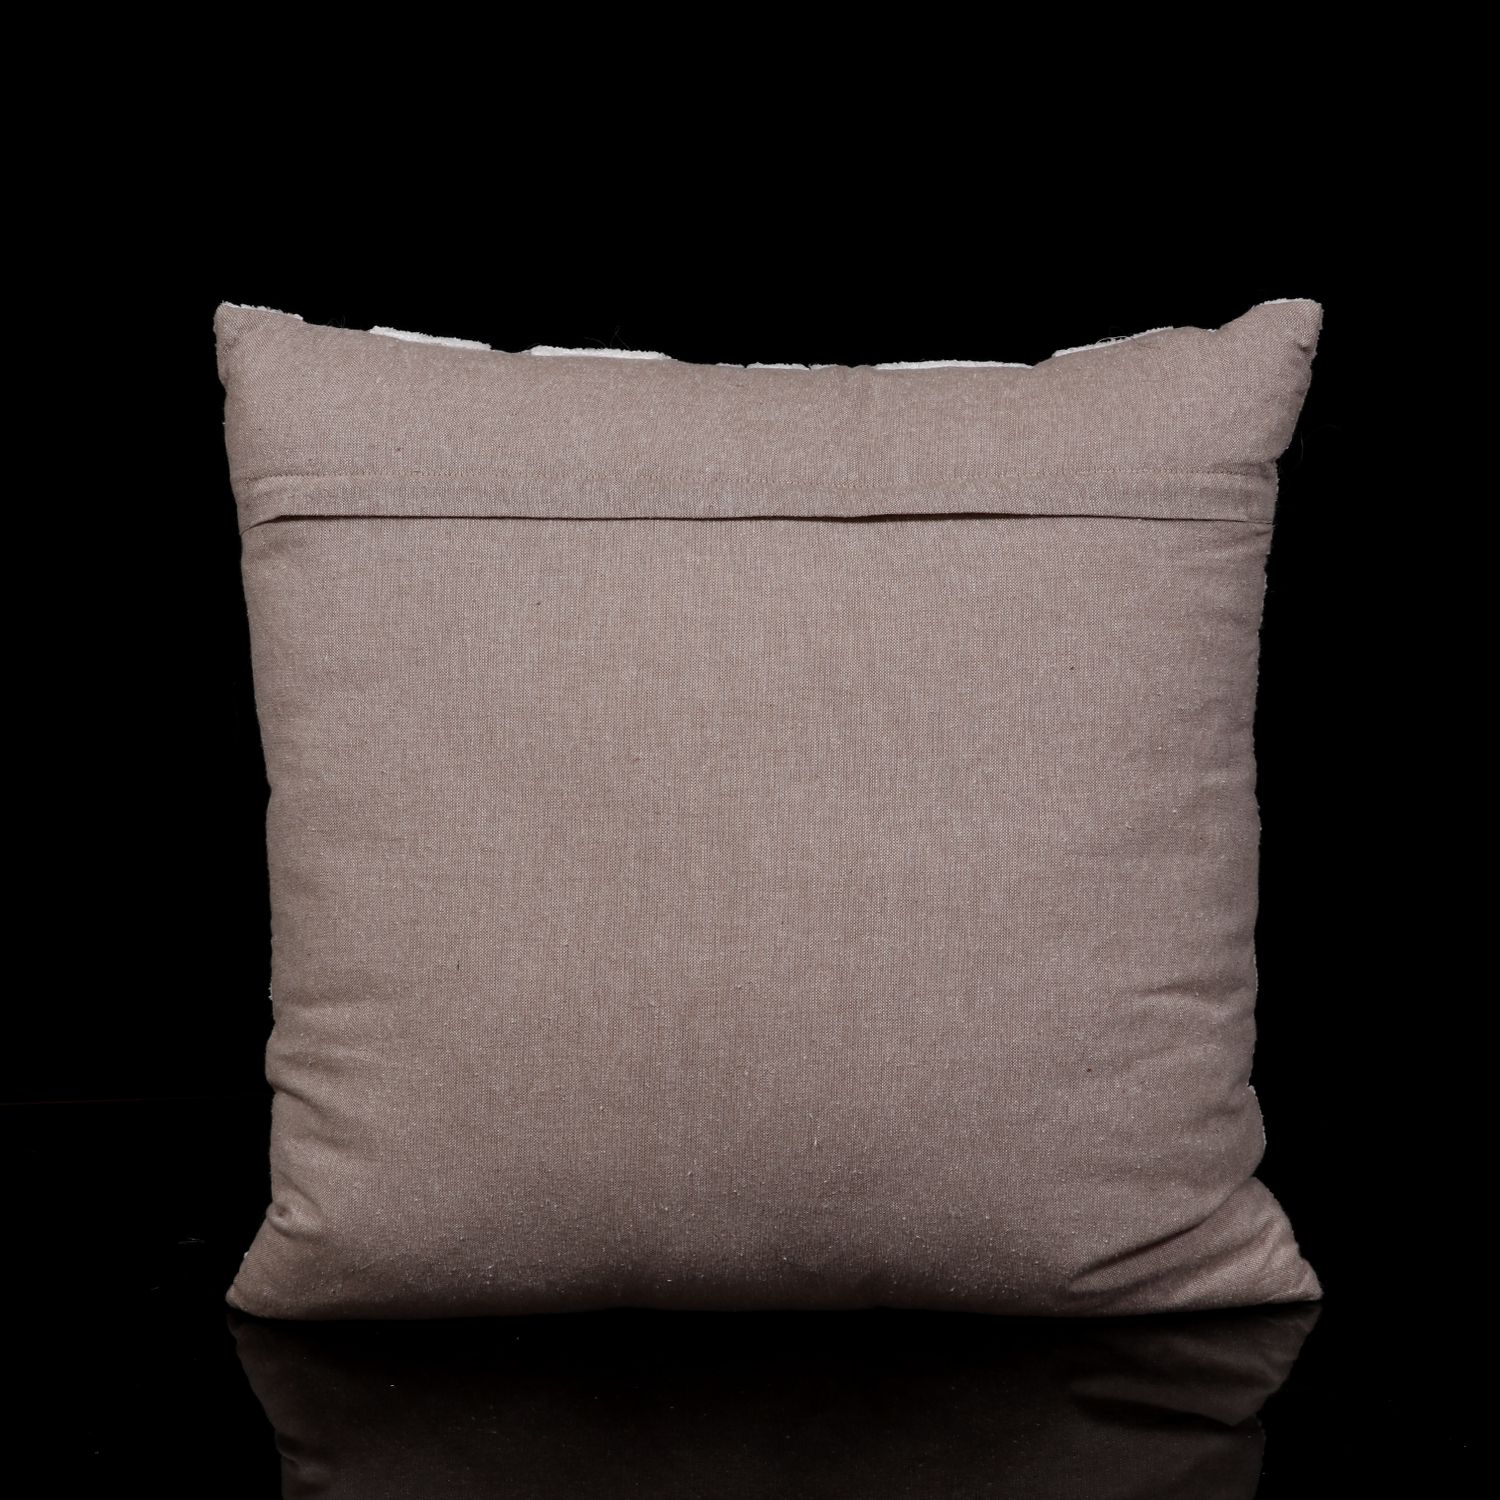 TEXTURED DAMASK DESIGN  EMBROIDERED PILLOW